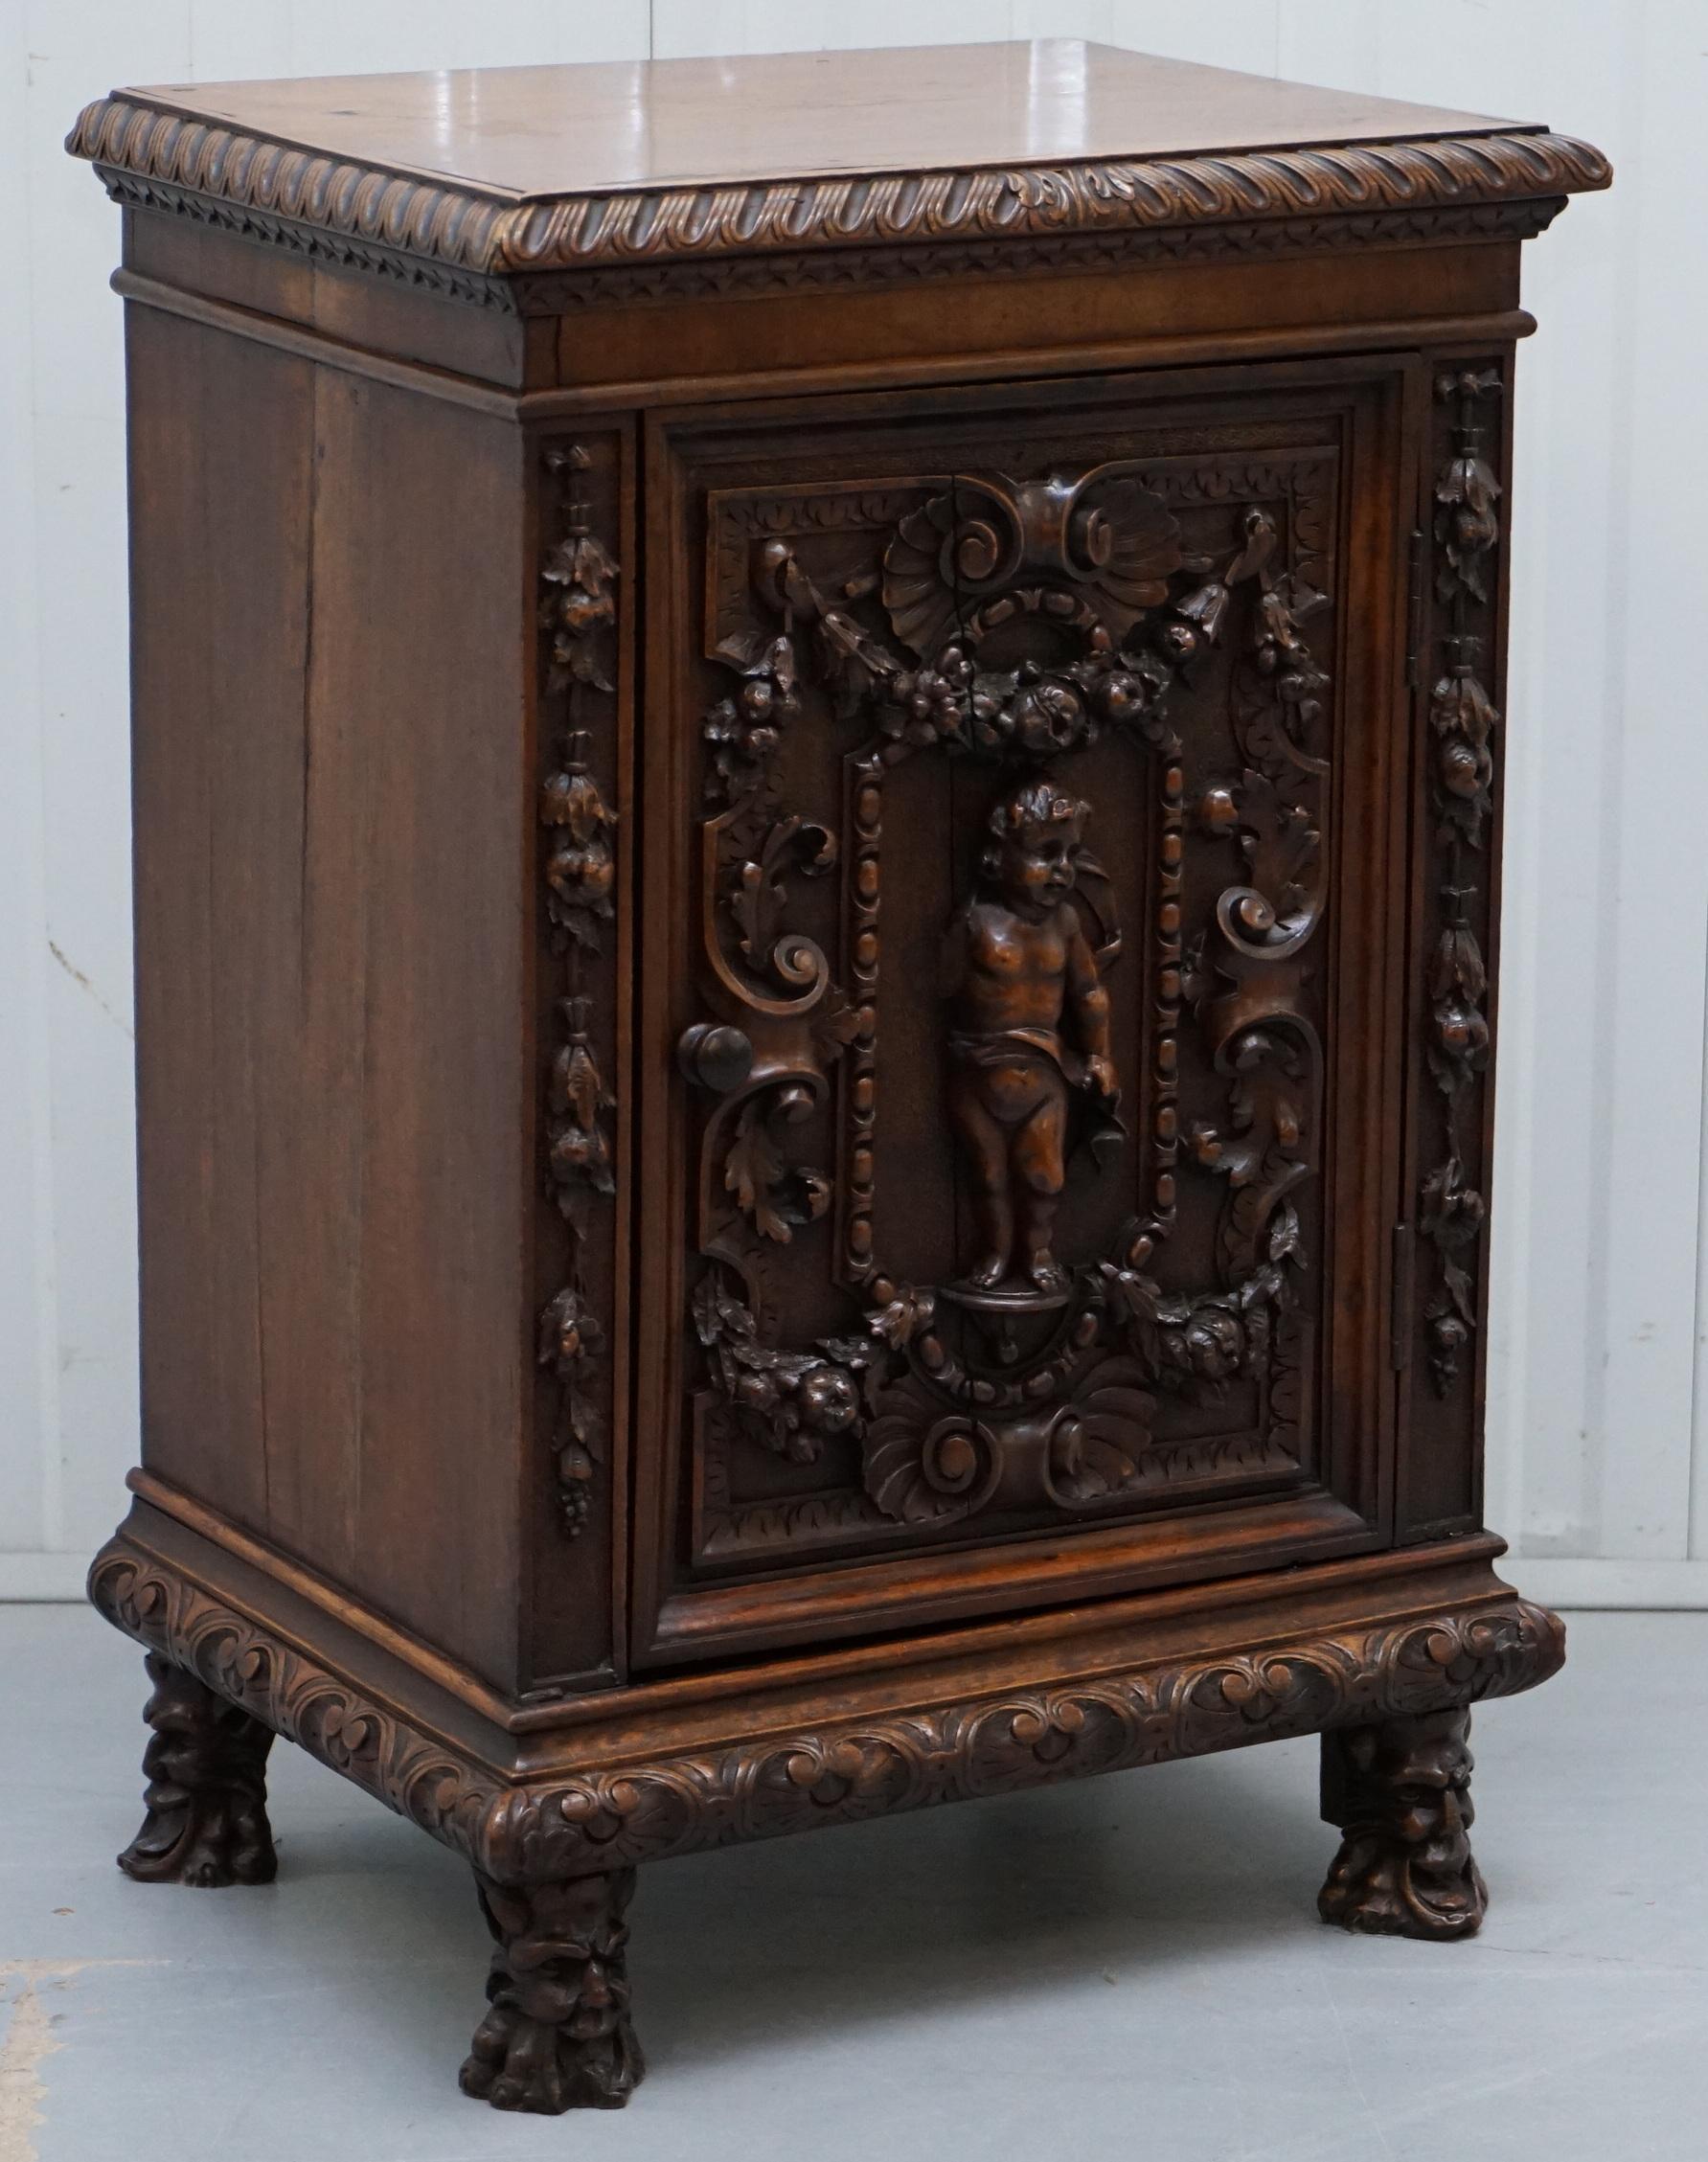 We are delighted to offer for sale this stunning circa 1780 hand carved walnut side cabinet with cherub and floral detailing

Please note the delivery fee listed is just a guide, it covers within the M25 only, for an accurate quote please send me